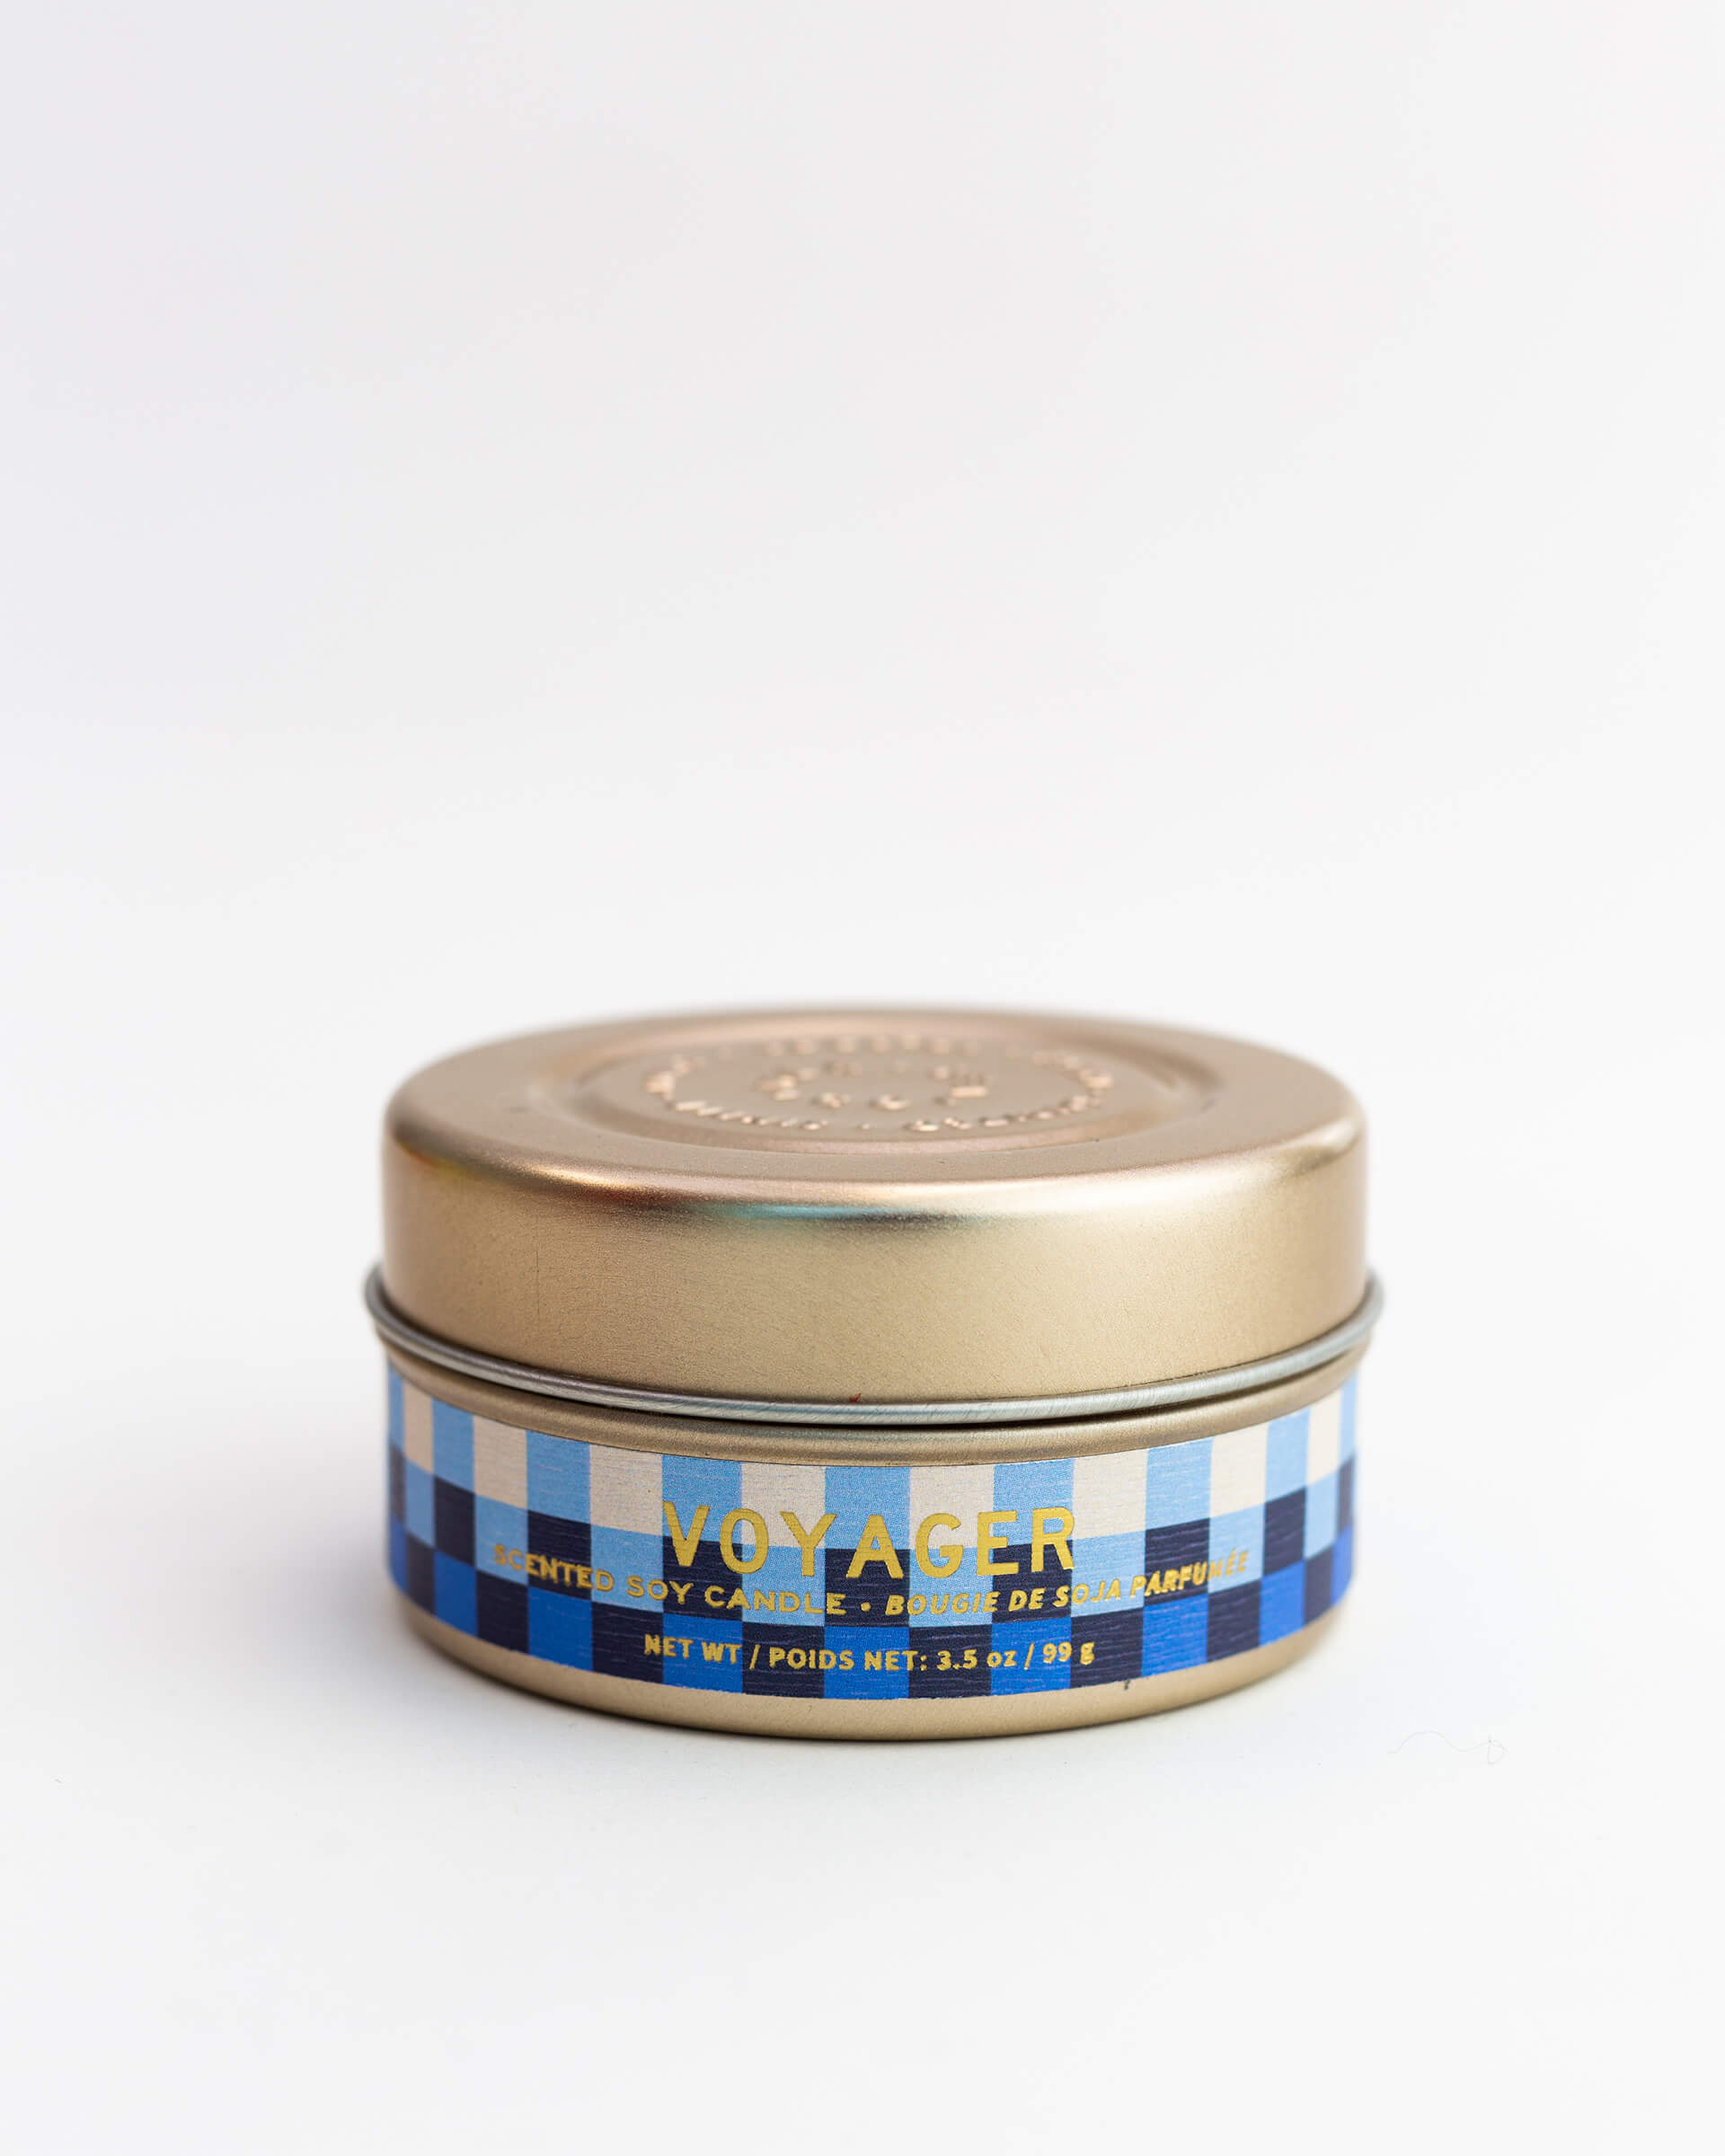 blue and white checkered 3 oz tin voyager candle on a white background